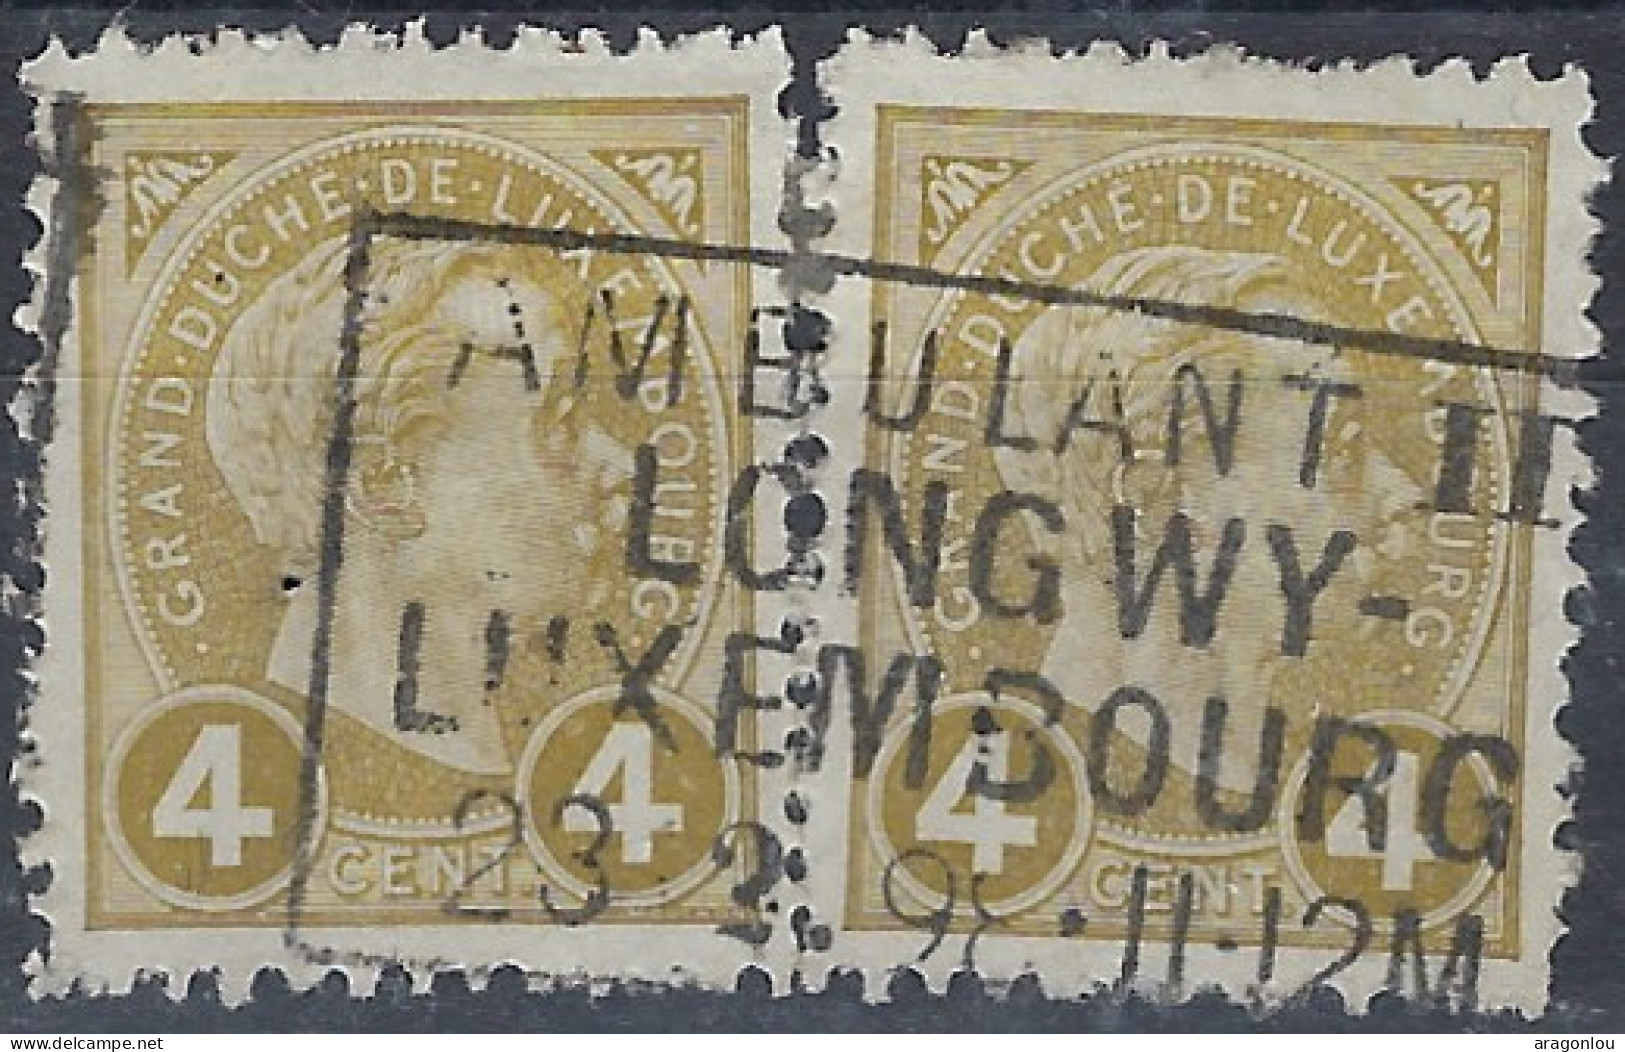 Luxembourg - Luxemburg - Timbres - Adolphe  -  Cachet  Ambulant  -  Longwy - Luxembourg   Paire   ° - 1895 Adolphe Profil